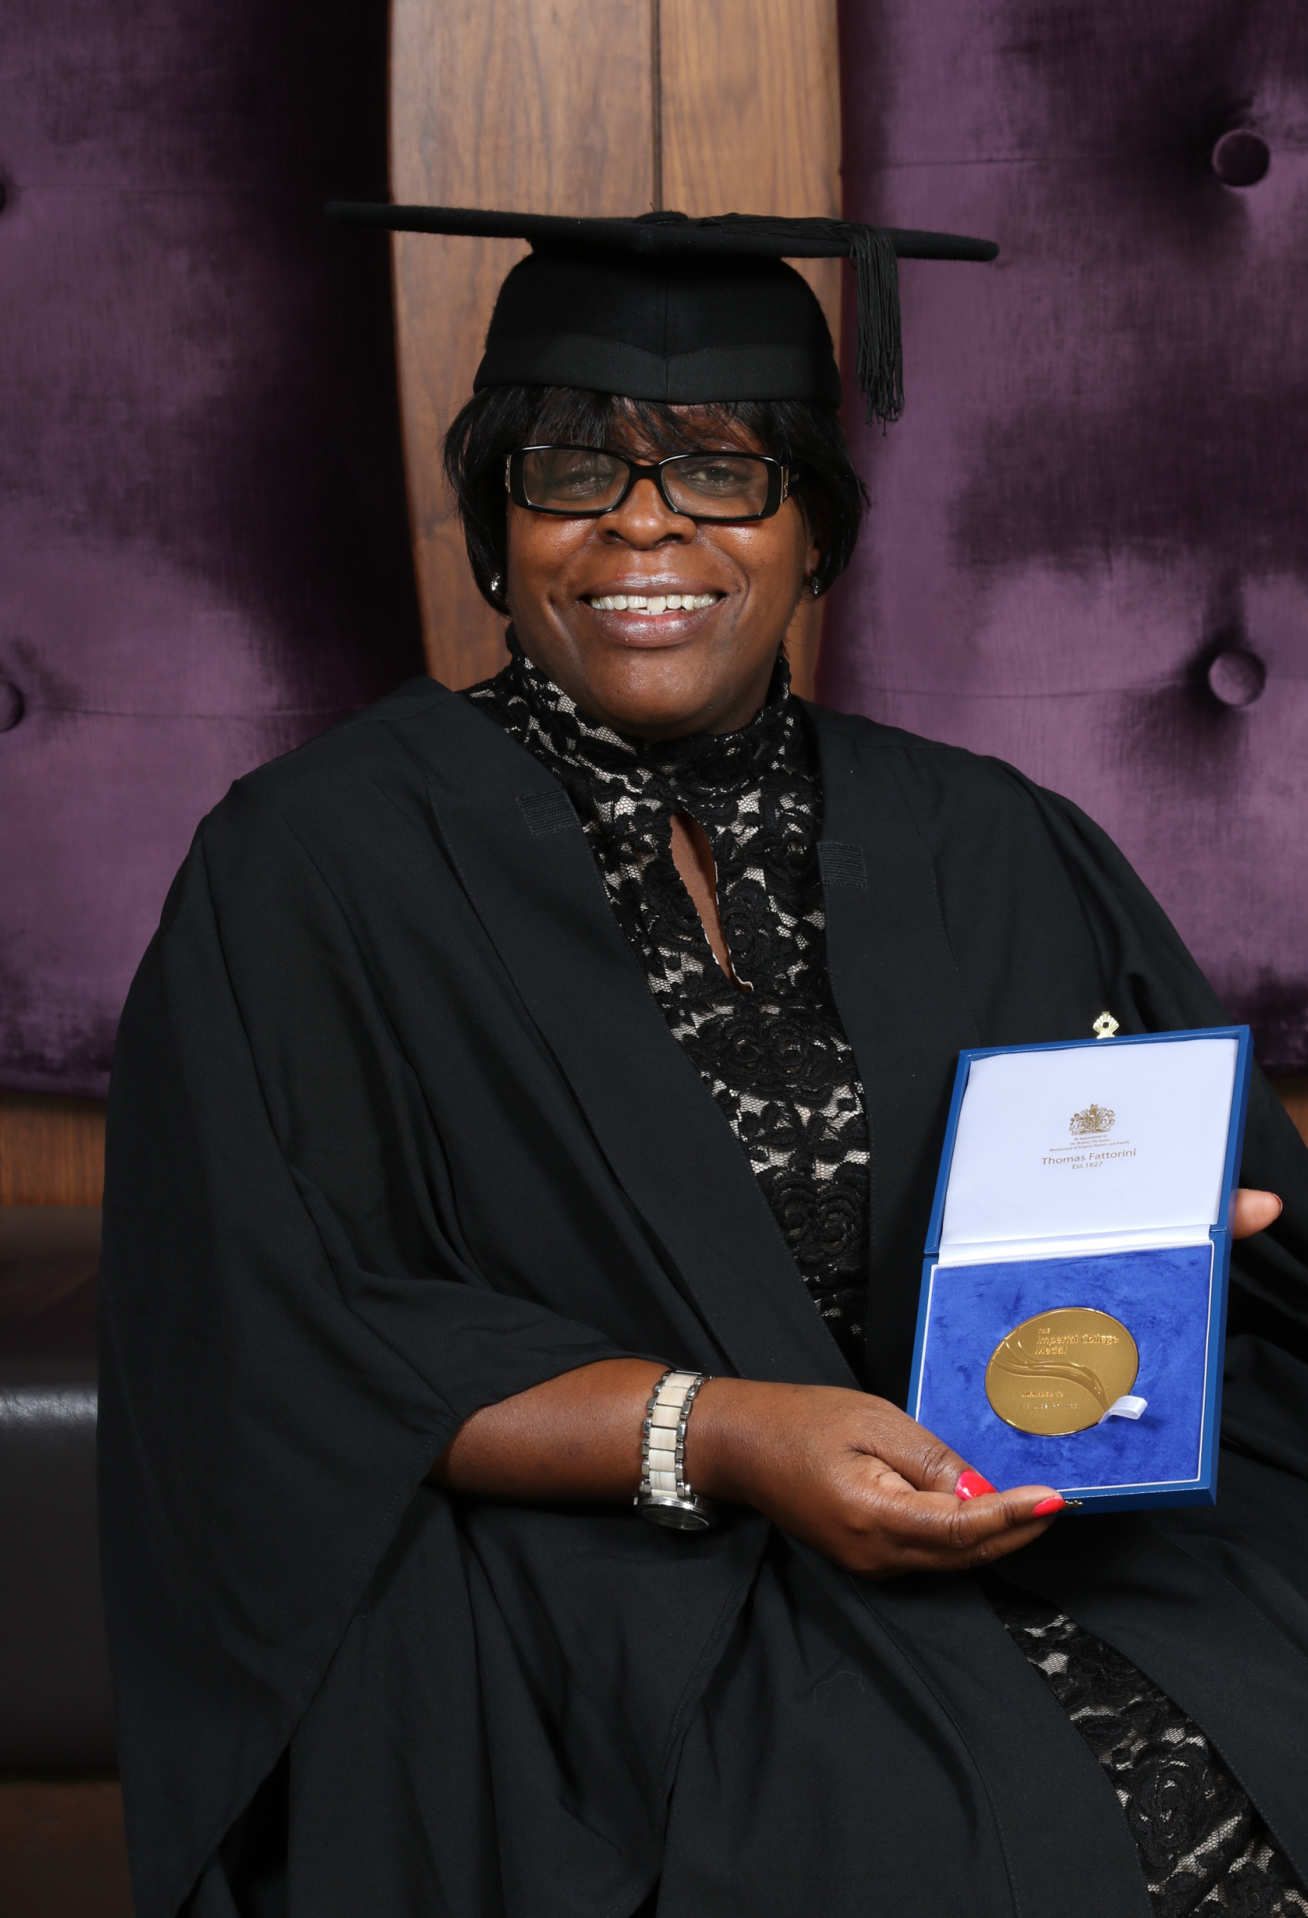 Lisa was awarded the Imperial College Medal in 2016